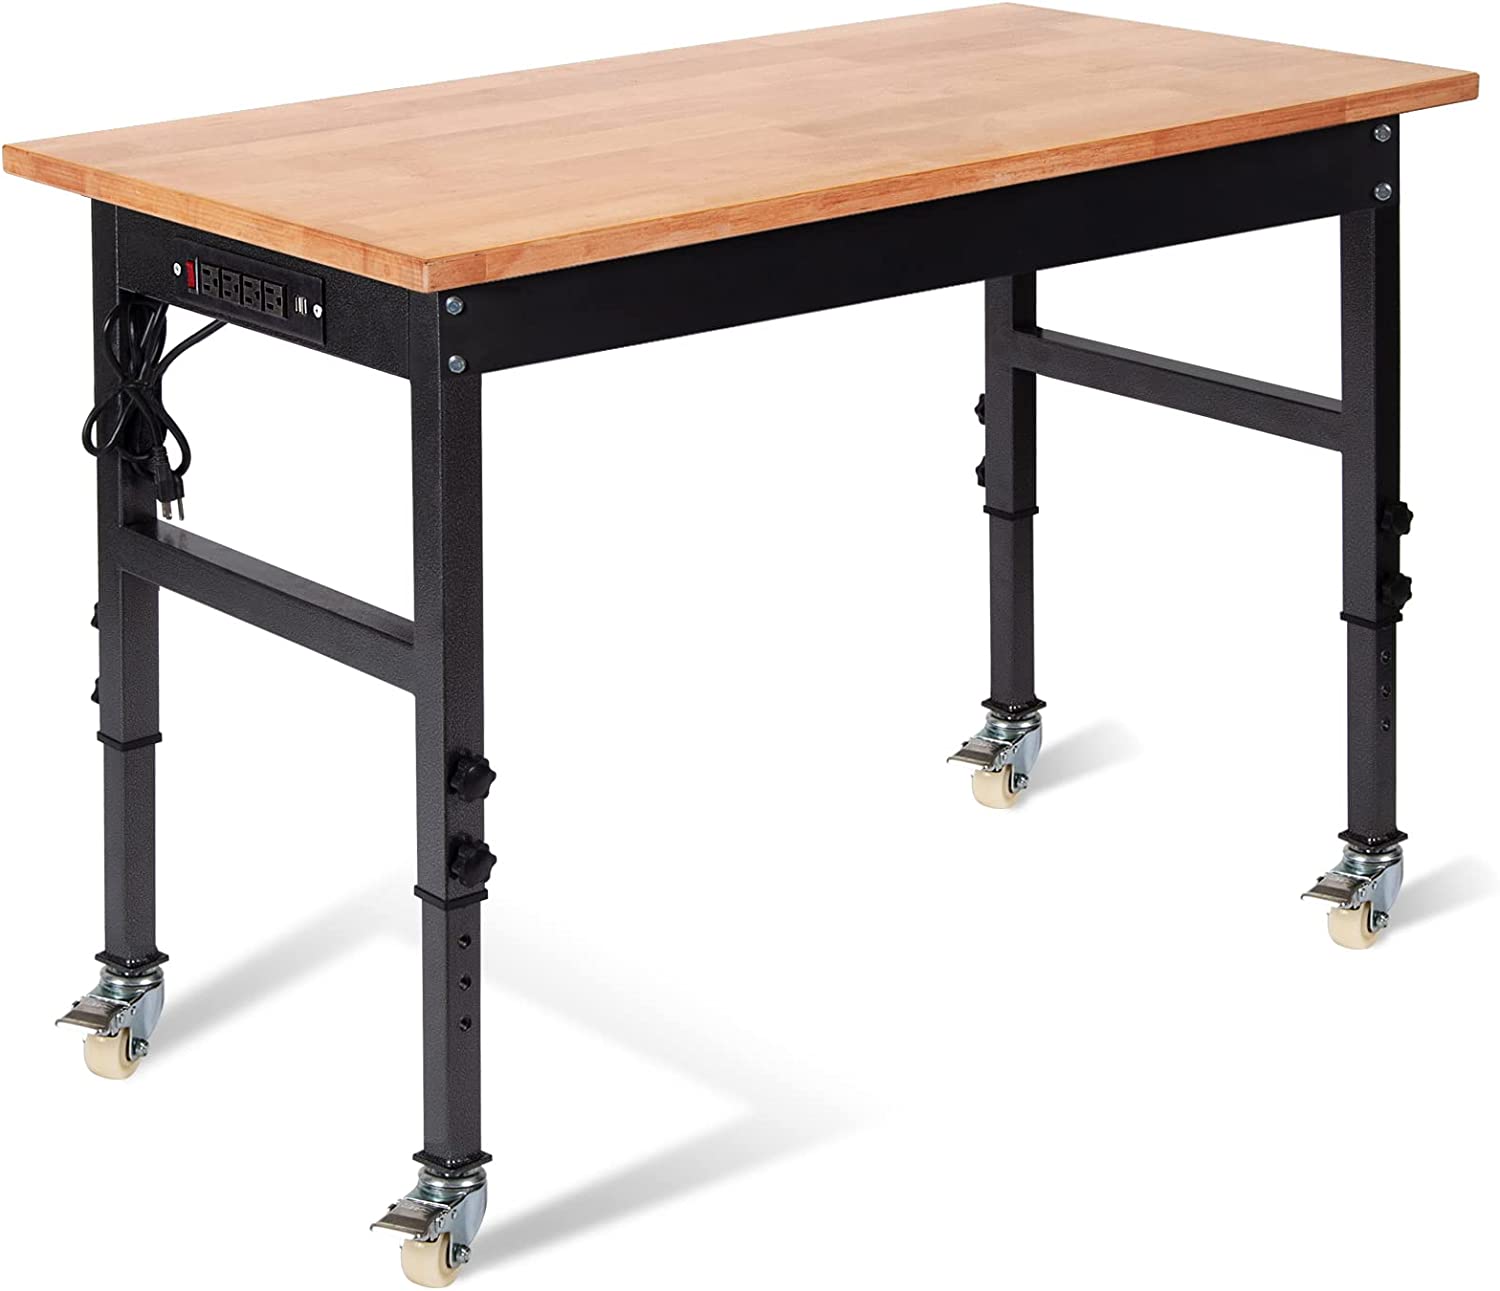 Rubberwood Top Heavy Duty Adjustable Work Bench,with wheels and socket